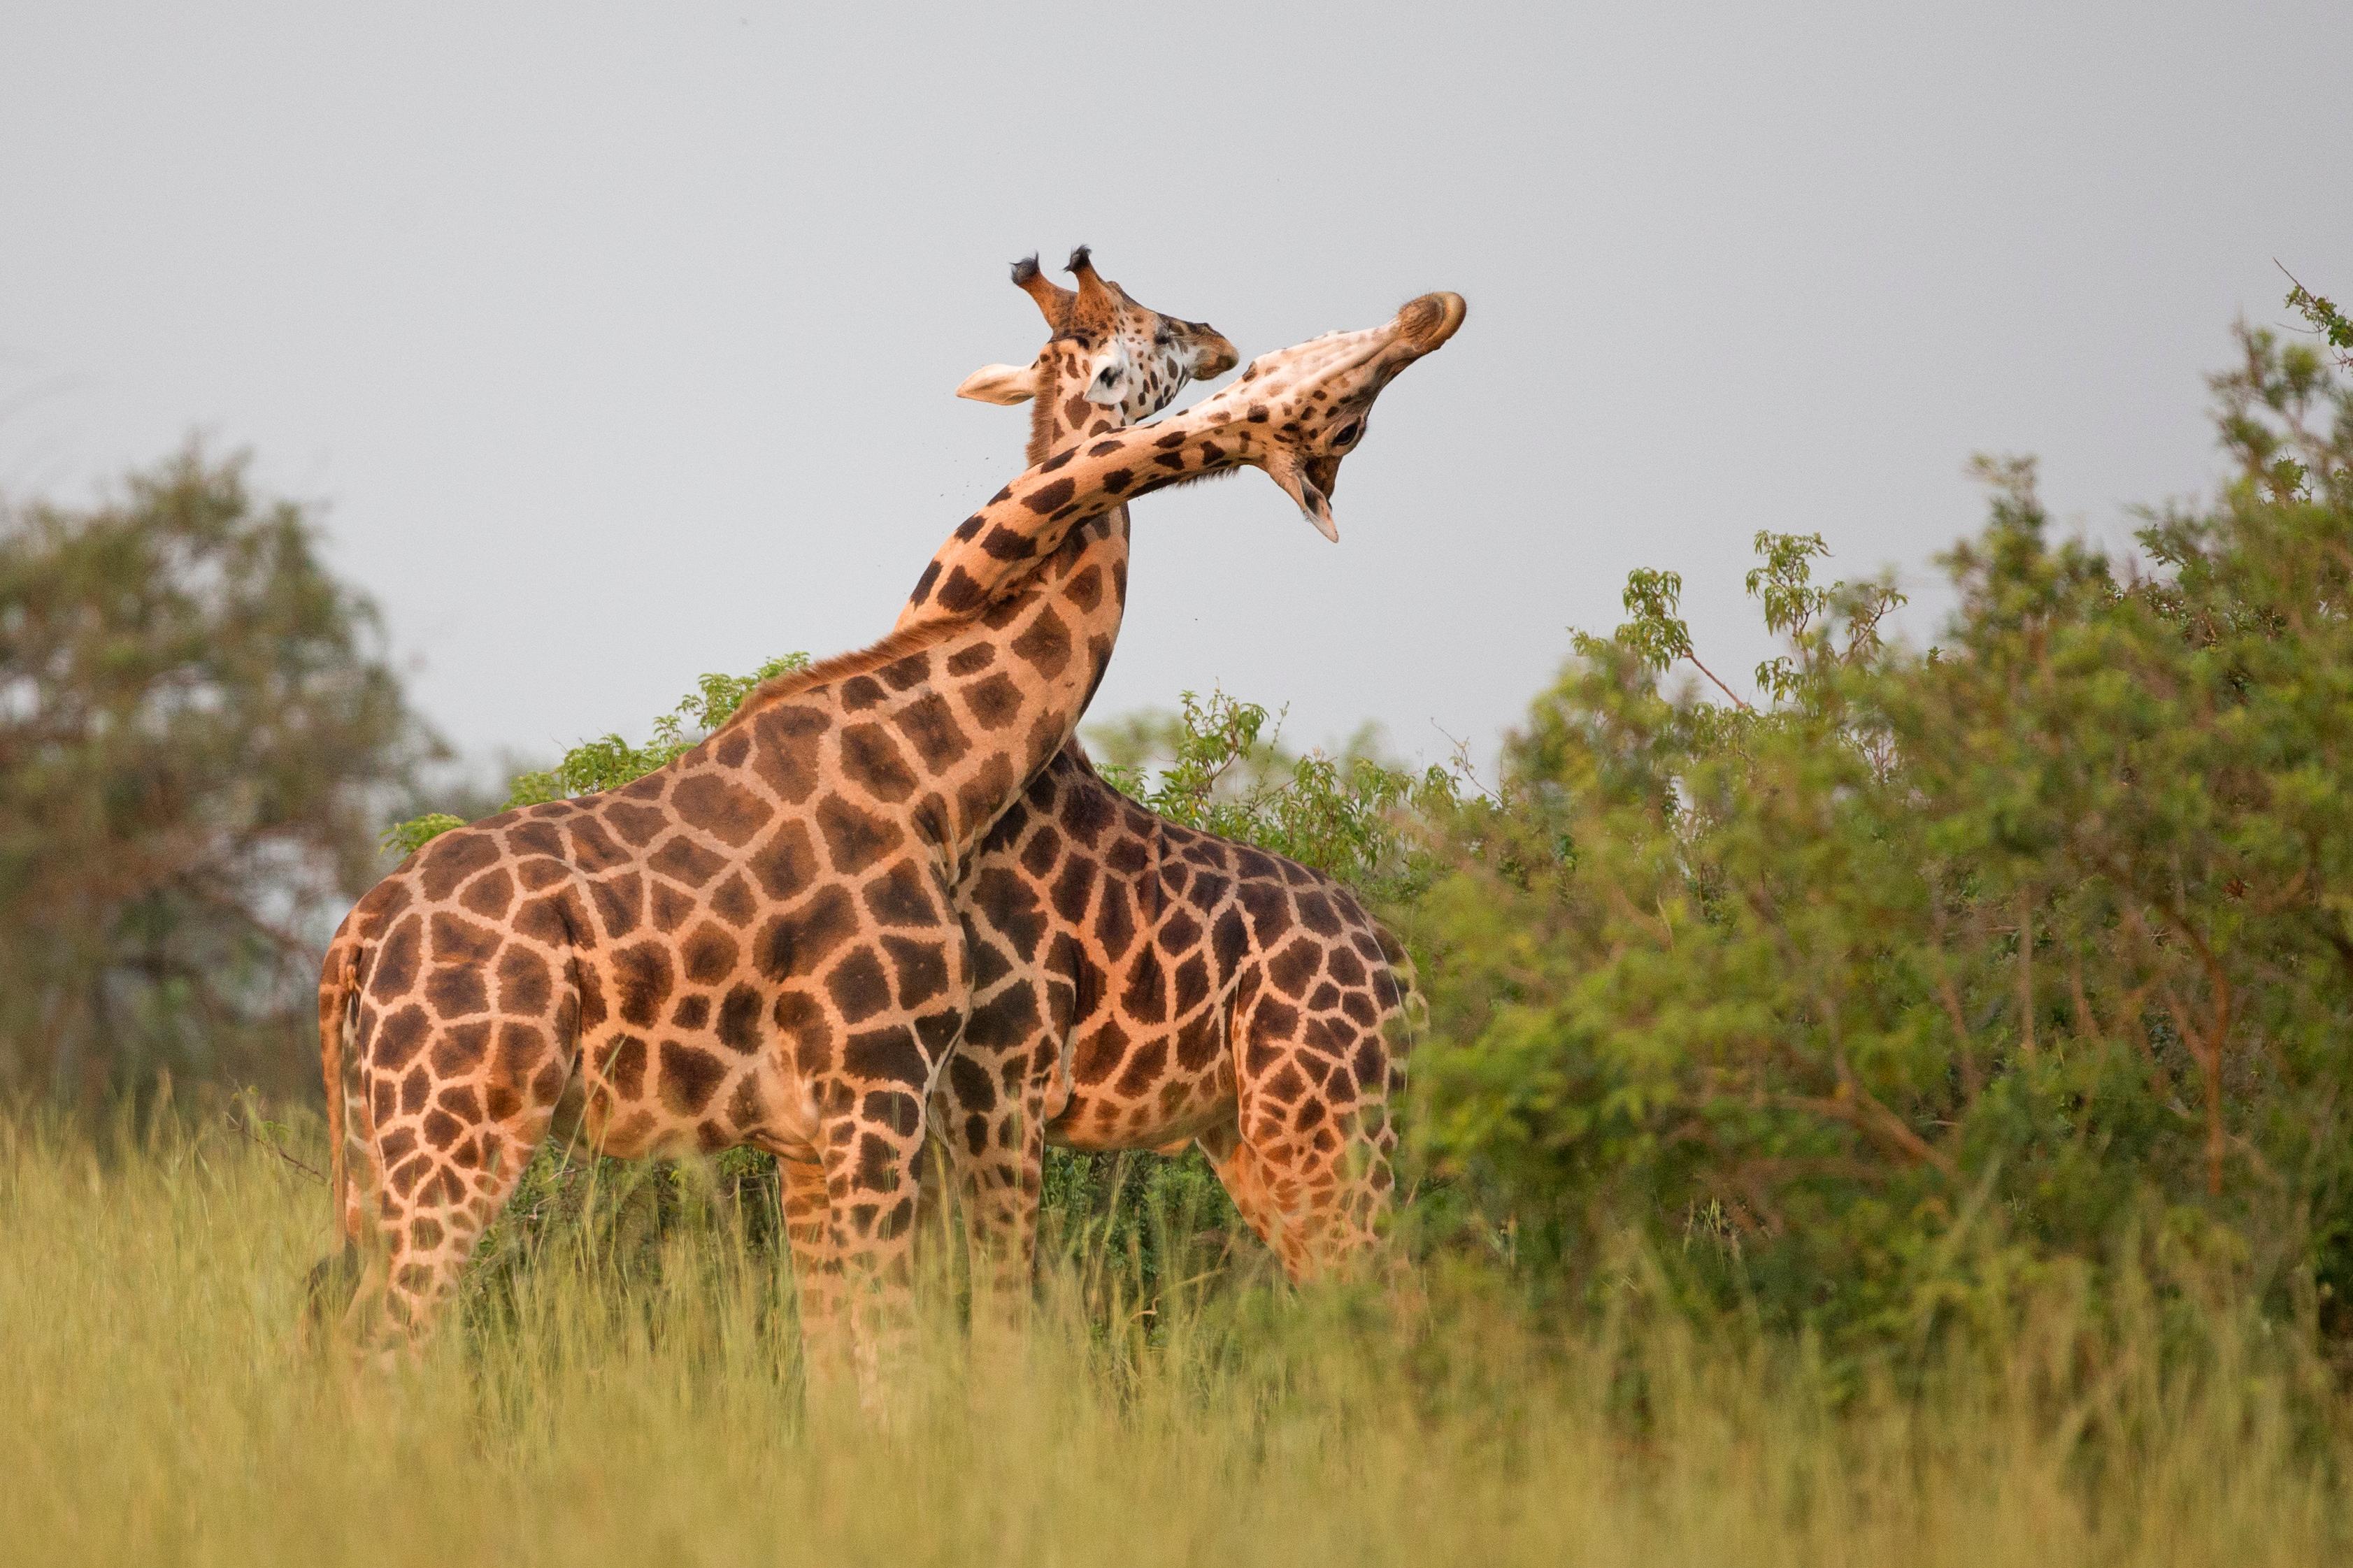 To Save Giraffes, We May Need to Put Our Necks Out | Science ...